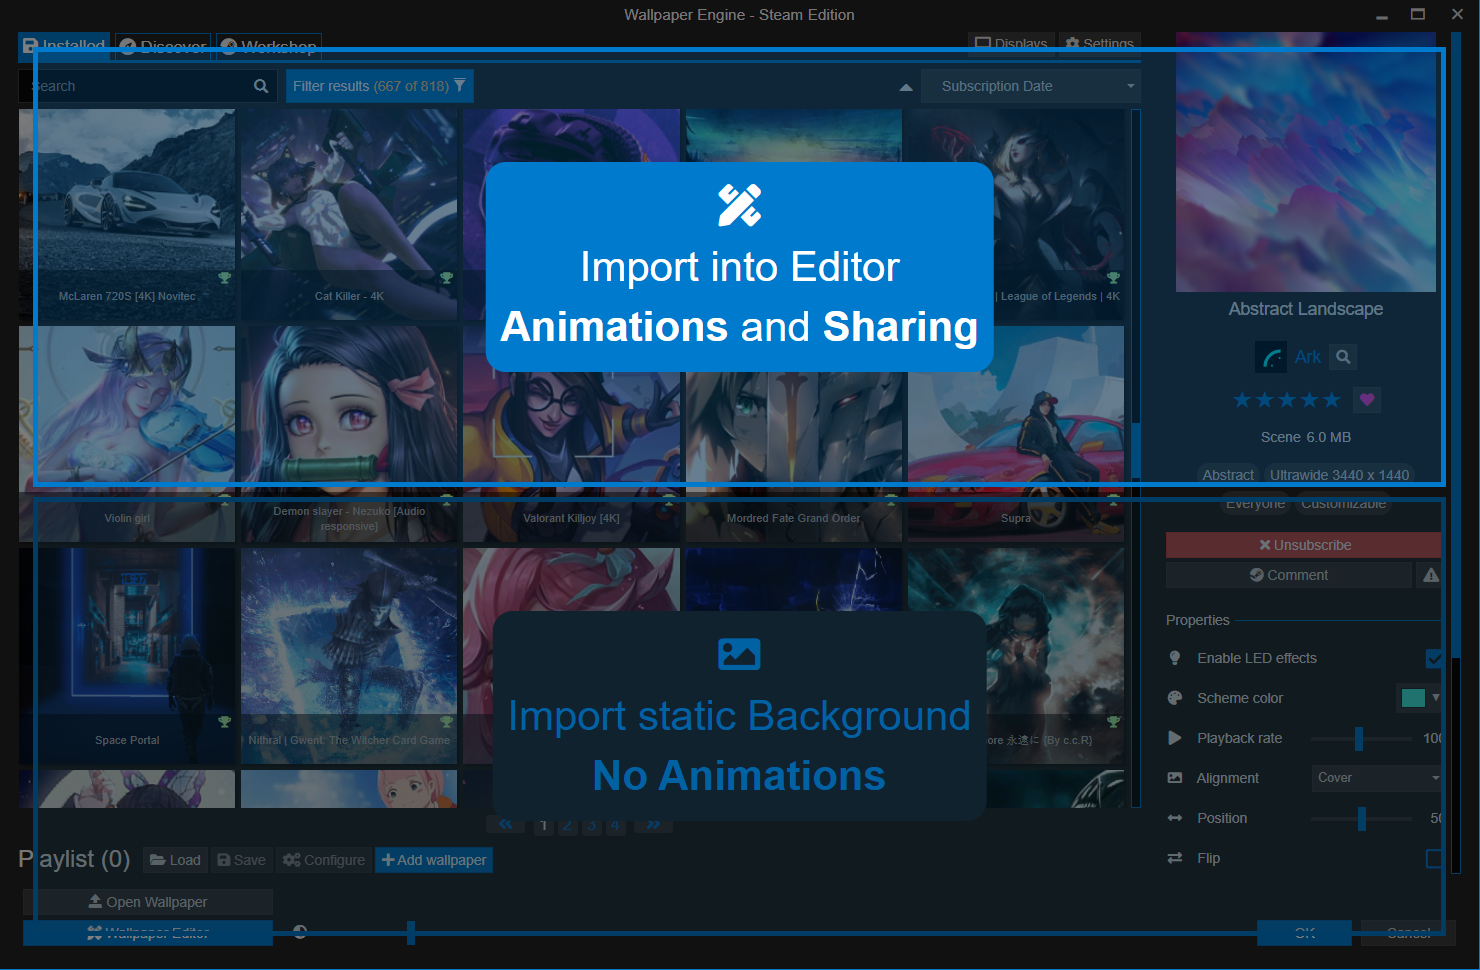 How To Make Wallpaper Engine Not Show On Steam : As a general rule of